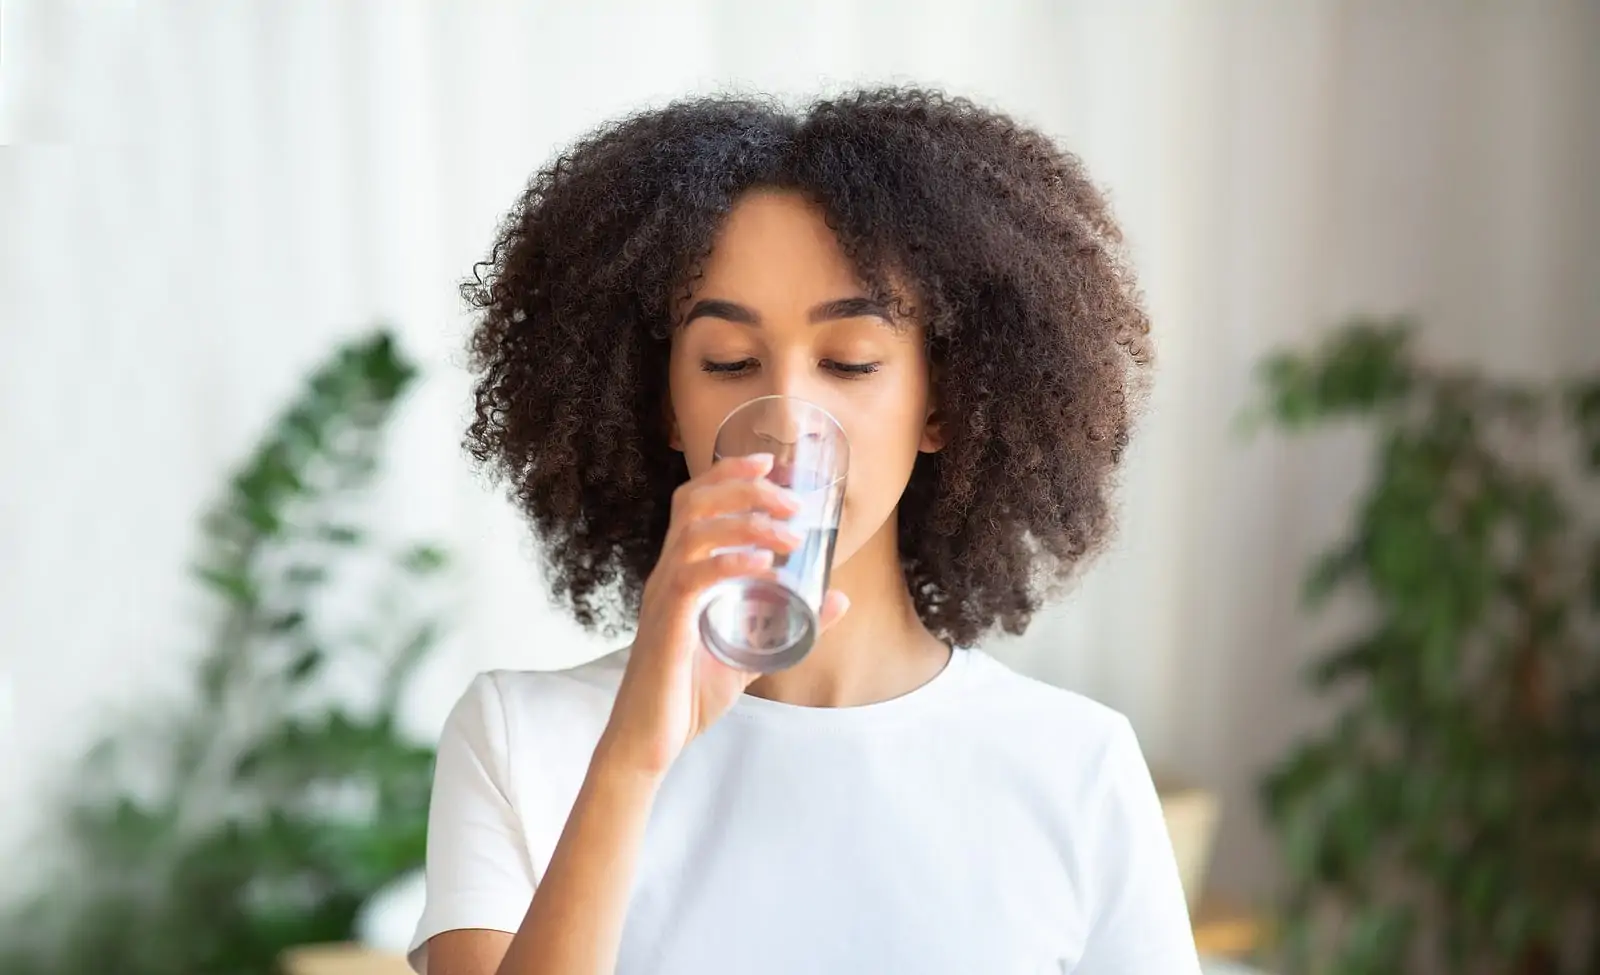 Is Carbonated Water Bad For You and Your Health